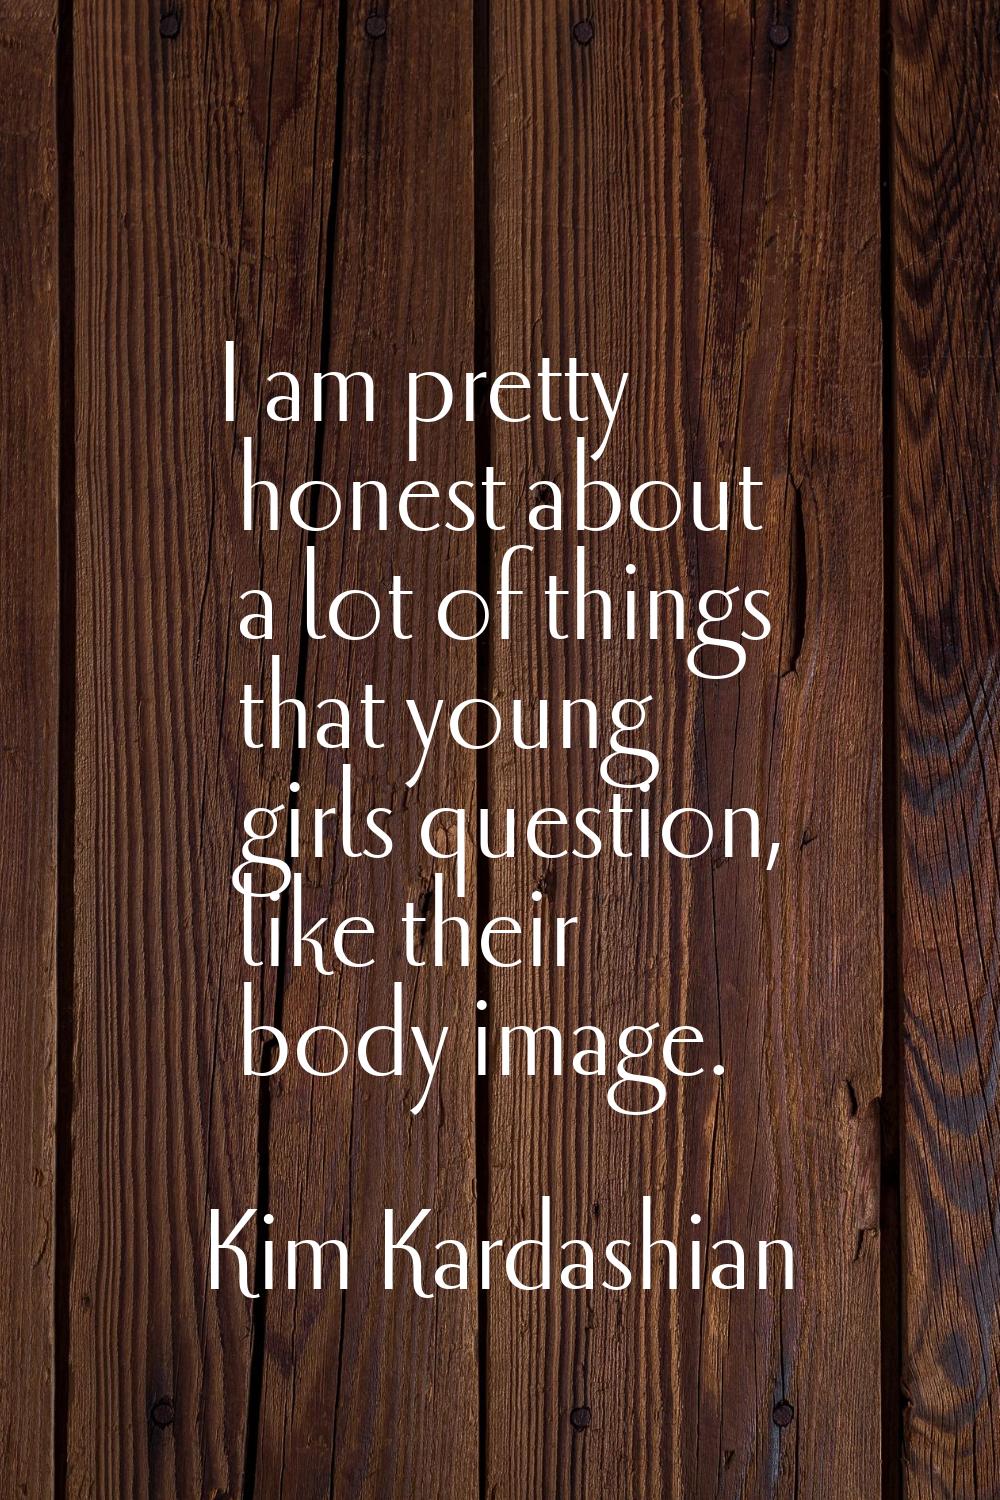 I am pretty honest about a lot of things that young girls question, like their body image.